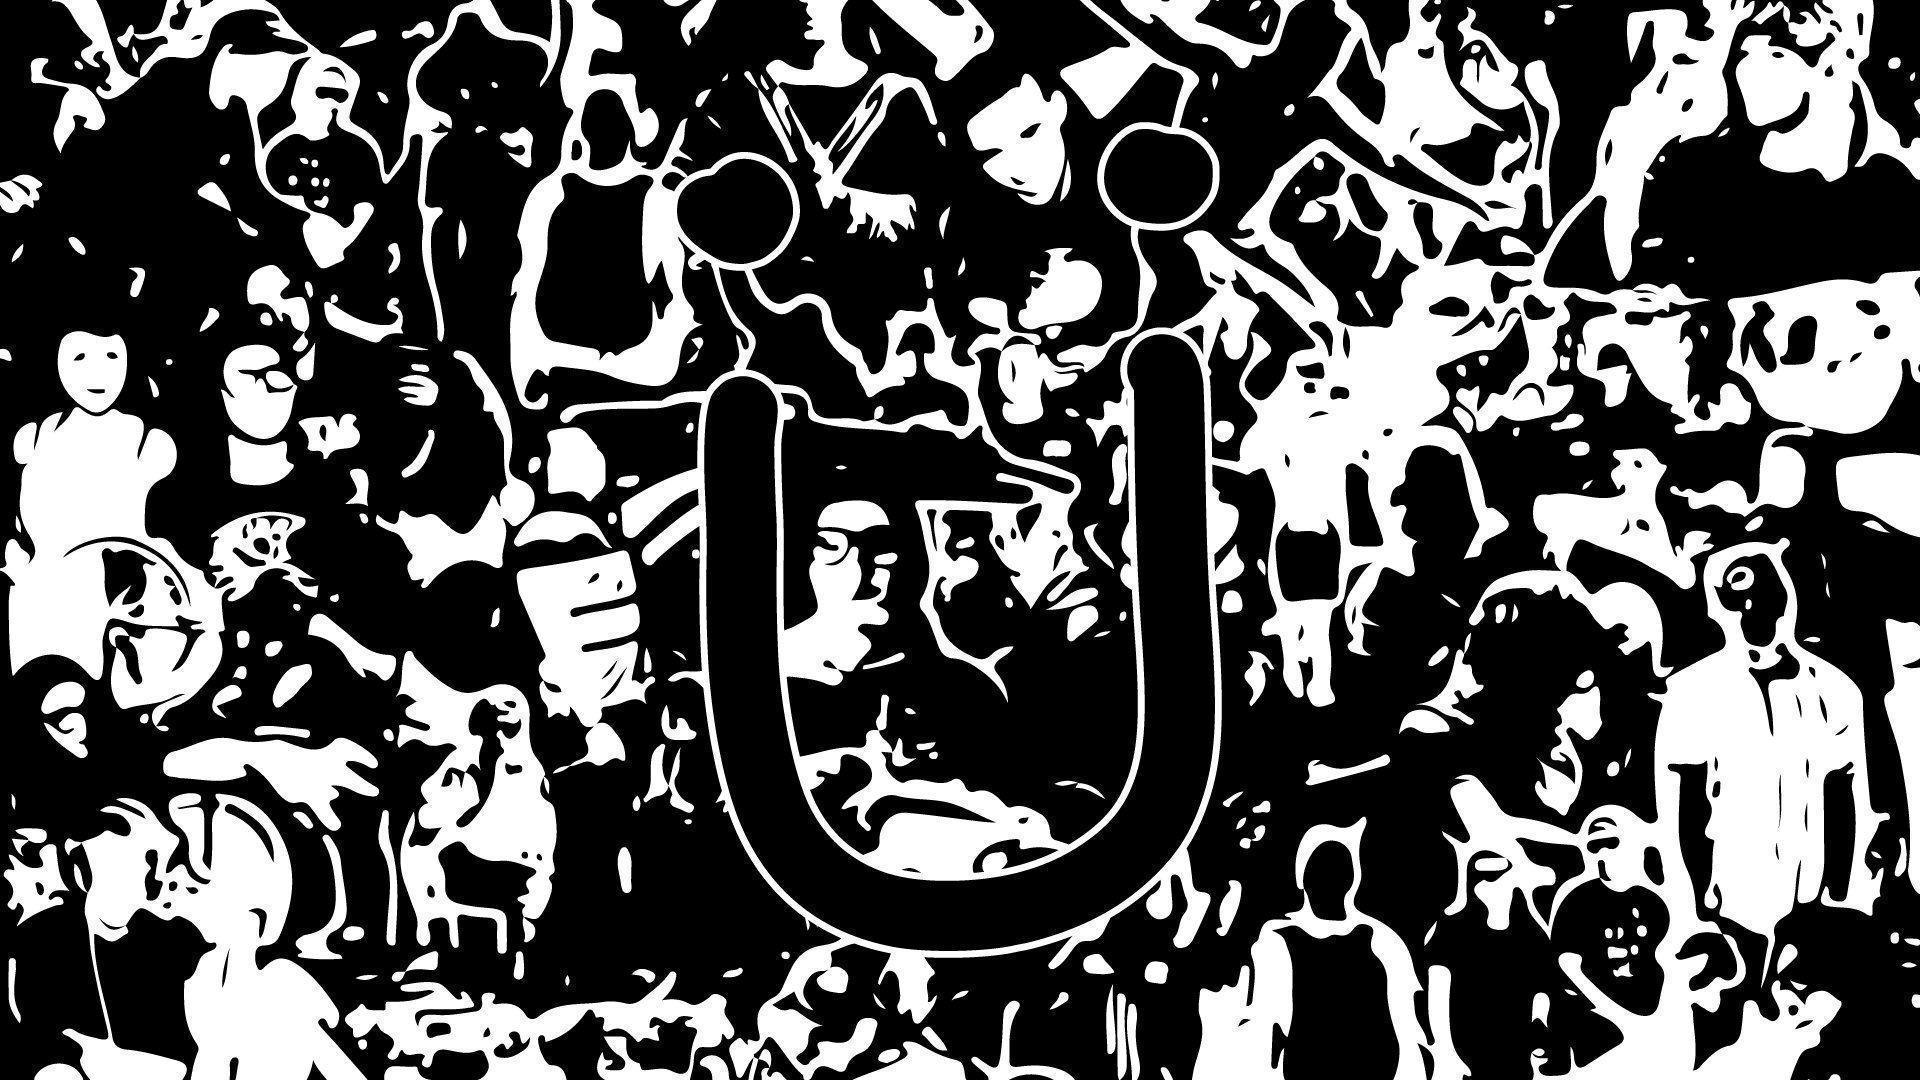 I made a bunch of Jack Ü wallpaper that I wanted to share